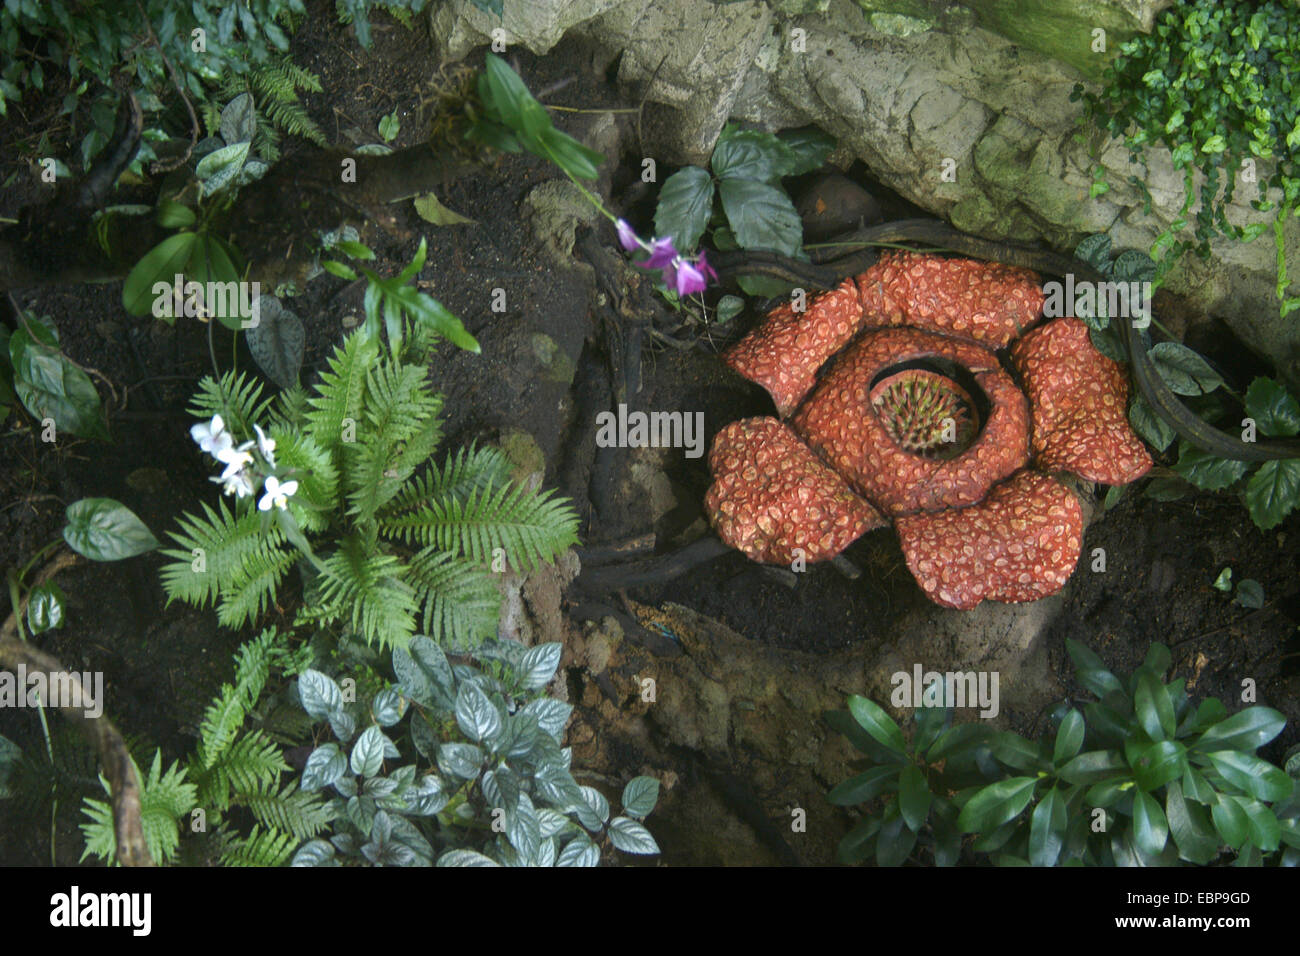 Rafflesia at Schonbrunn Zoo in Vienna, Austria. Rafflesia is the biggest flower in the world with rotting meat smell. Stock Photo